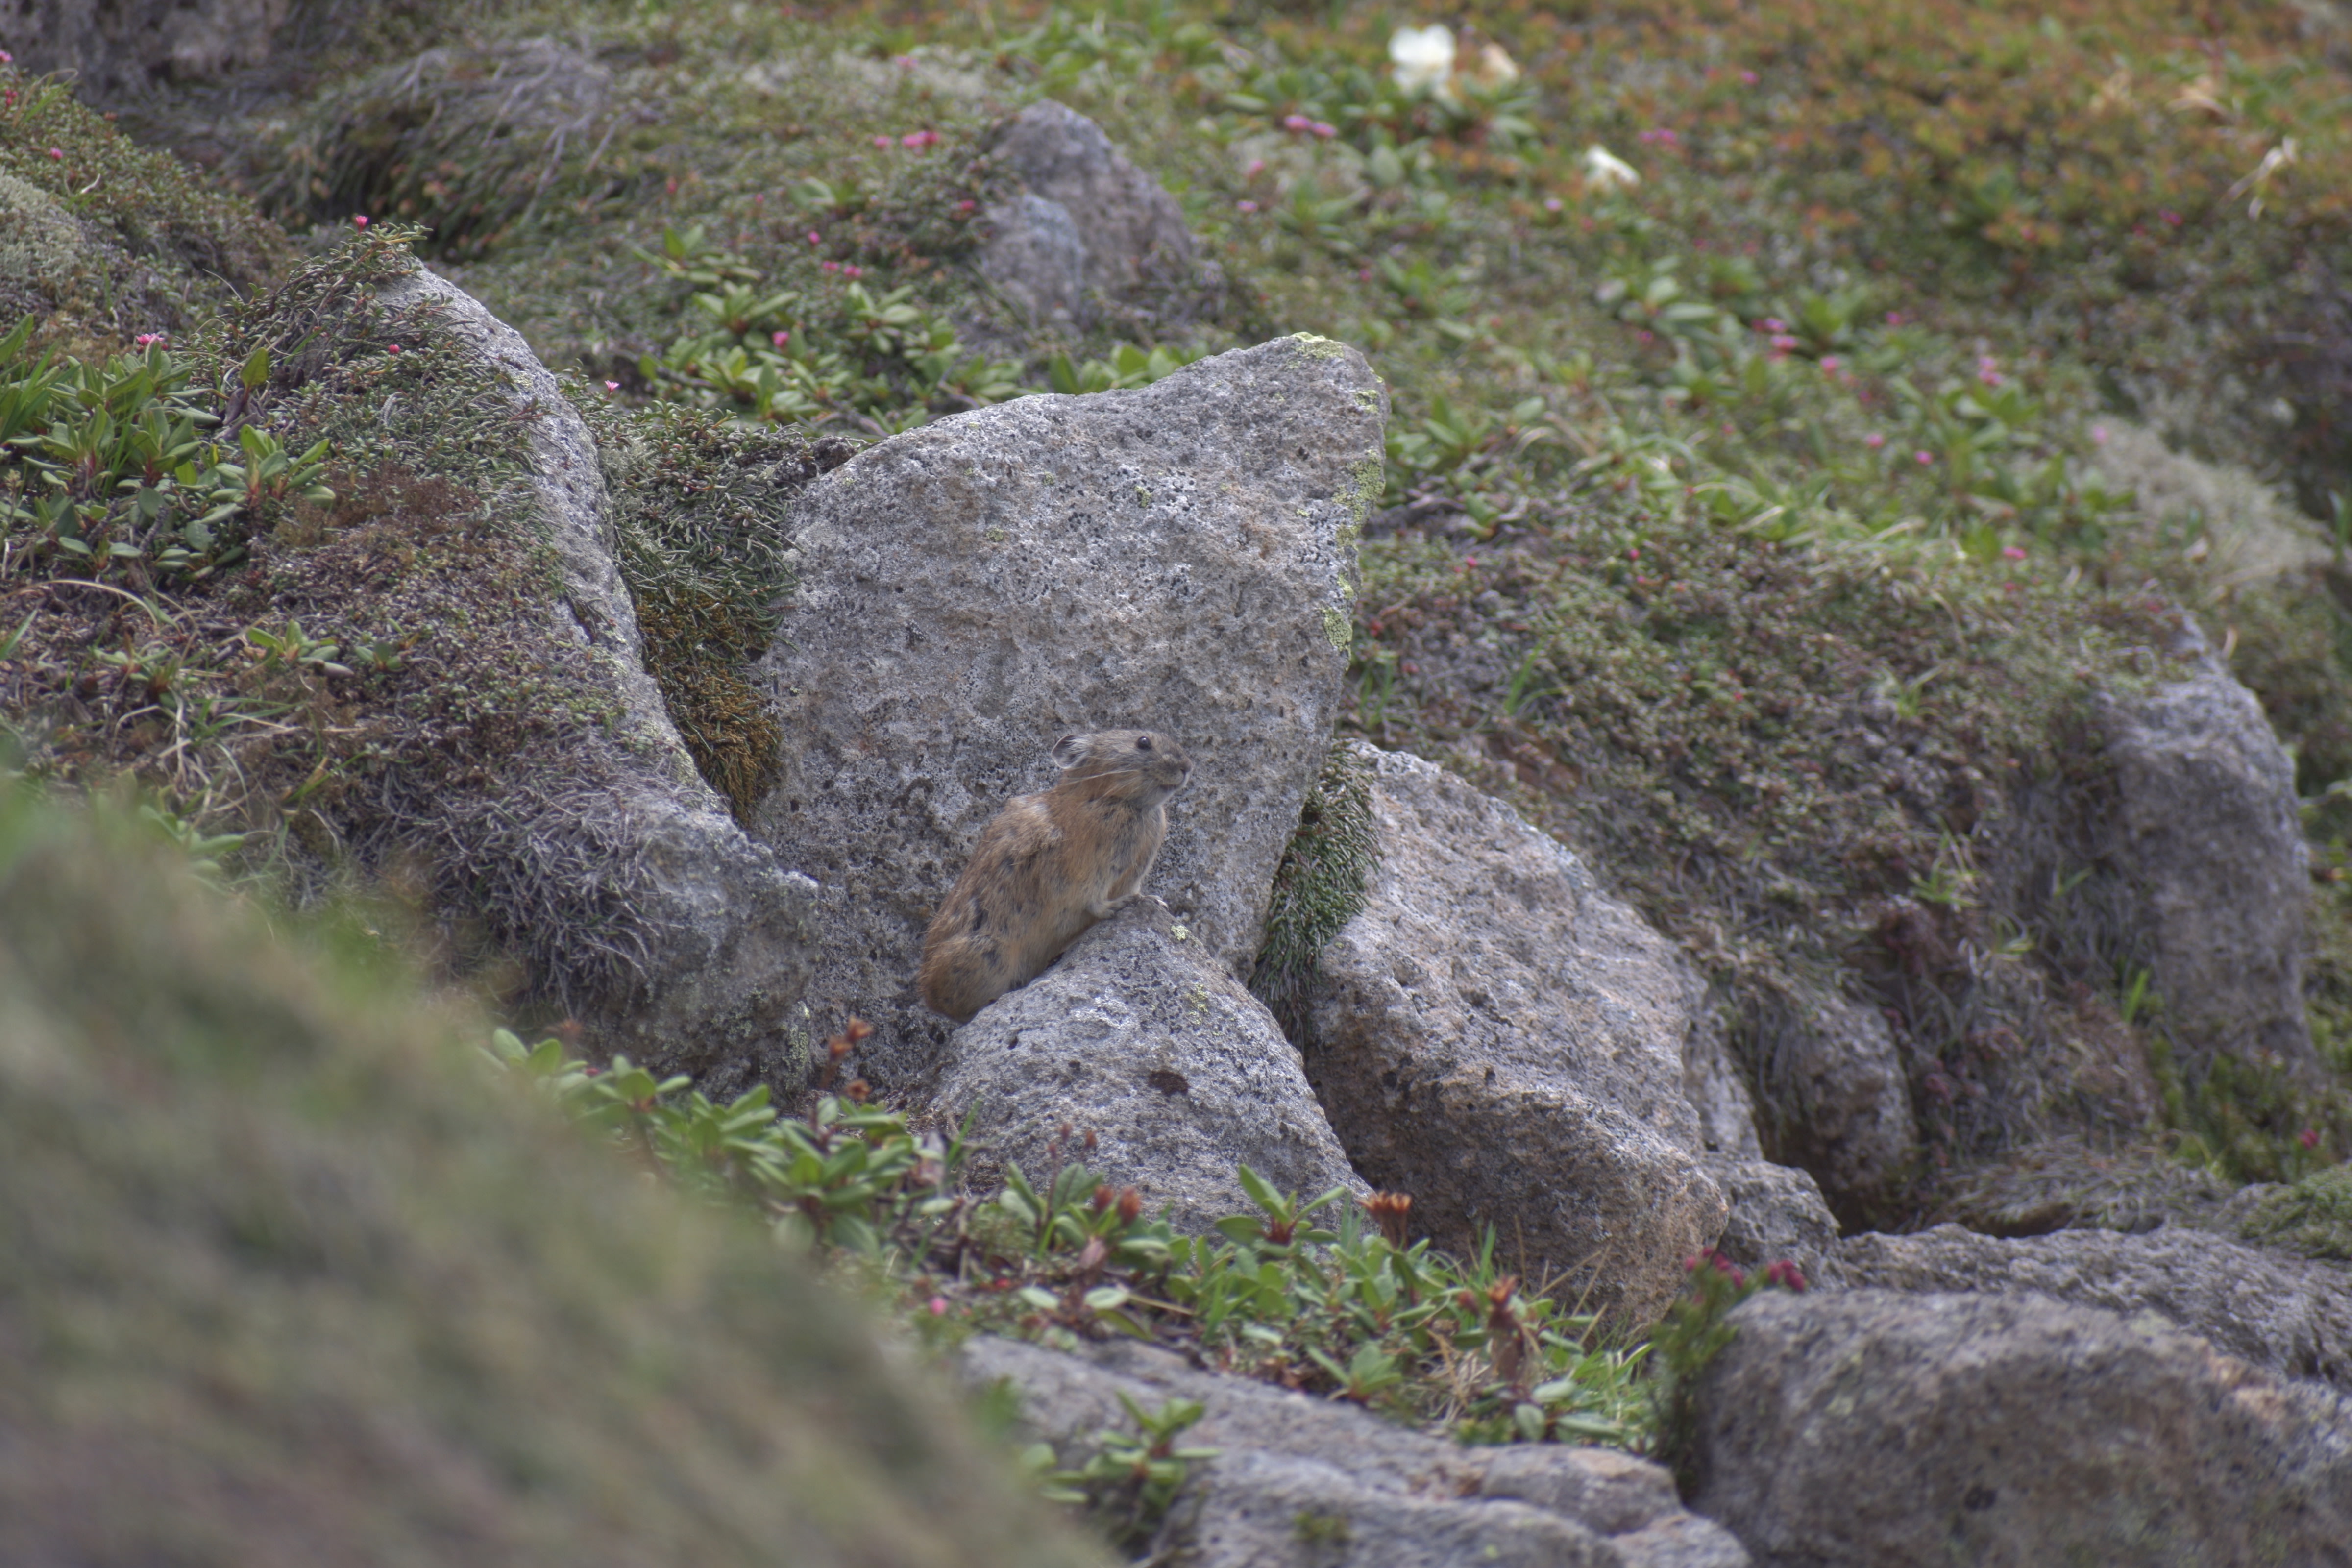 A Northern Pika sits on a rock